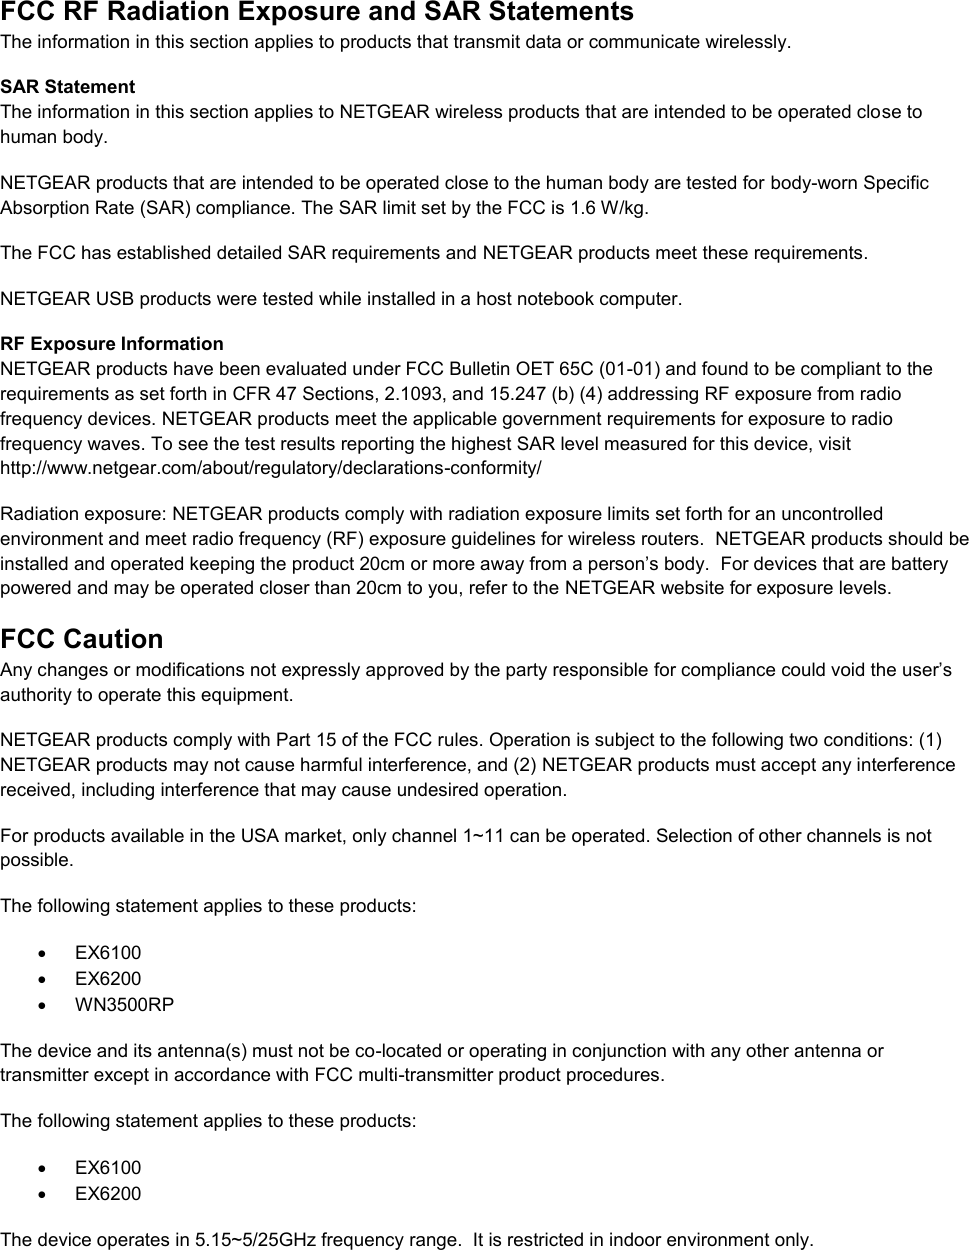  FCC RF Radiation Exposure and SAR Statements The information in this section applies to products that transmit data or communicate wirelessly. SAR Statement The information in this section applies to NETGEAR wireless products that are intended to be operated close to human body.  NETGEAR products that are intended to be operated close to the human body are tested for body-worn Specific Absorption Rate (SAR) compliance. The SAR limit set by the FCC is 1.6 W/kg. The FCC has established detailed SAR requirements and NETGEAR products meet these requirements. NETGEAR USB products were tested while installed in a host notebook computer.  RF Exposure Information NETGEAR products have been evaluated under FCC Bulletin OET 65C (01-01) and found to be compliant to the requirements as set forth in CFR 47 Sections, 2.1093, and 15.247 (b) (4) addressing RF exposure from radio frequency devices. NETGEAR products meet the applicable government requirements for exposure to radio frequency waves. To see the test results reporting the highest SAR level measured for this device, visit http://www.netgear.com/about/regulatory/declarations-conformity/ Radiation exposure: NETGEAR products comply with radiation exposure limits set forth for an uncontrolled environment and meet radio frequency (RF) exposure guidelines for wireless routers.  NETGEAR products should be installed and operated keeping the product 20cm or more away from a person’s body.  For devices that are battery powered and may be operated closer than 20cm to you, refer to the NETGEAR website for exposure levels. FCC Caution Any changes or modifications not expressly approved by the party responsible for compliance could void the user’s authority to operate this equipment. NETGEAR products comply with Part 15 of the FCC rules. Operation is subject to the following two conditions: (1) NETGEAR products may not cause harmful interference, and (2) NETGEAR products must accept any interference received, including interference that may cause undesired operation. For products available in the USA market, only channel 1~11 can be operated. Selection of other channels is not possible. The following statement applies to these products:   EX6100   EX6200   WN3500RP The device and its antenna(s) must not be co-located or operating in conjunction with any other antenna or transmitter except in accordance with FCC multi-transmitter product procedures. The following statement applies to these products:   EX6100   EX6200 The device operates in 5.15~5/25GHz frequency range.  It is restricted in indoor environment only.  